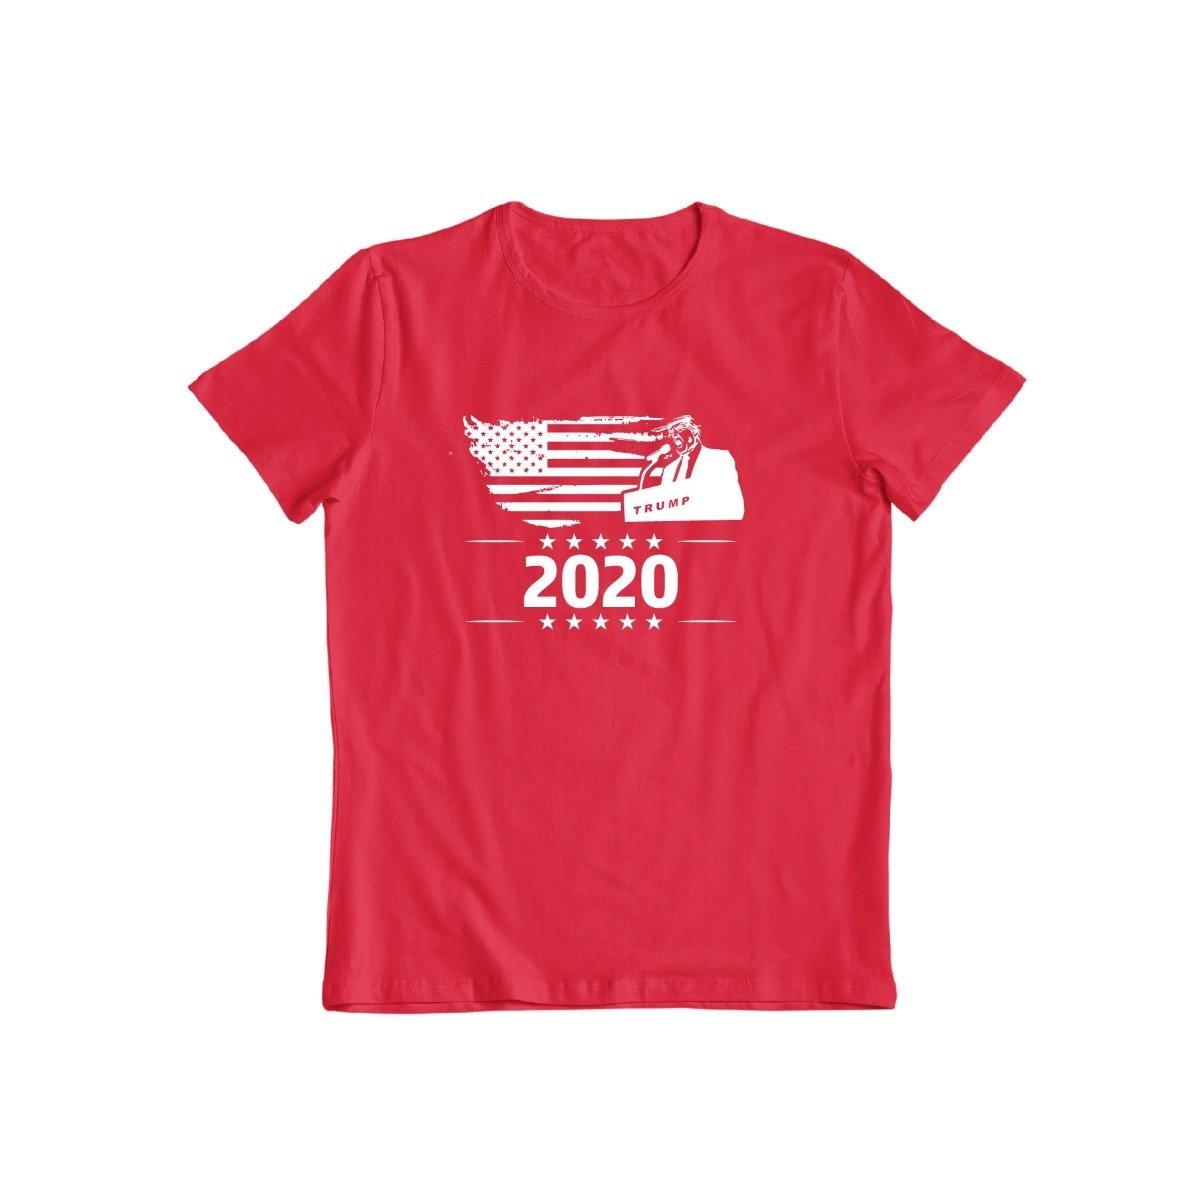 Trump 2020 T-Shirt for Men and Women / Red / Small